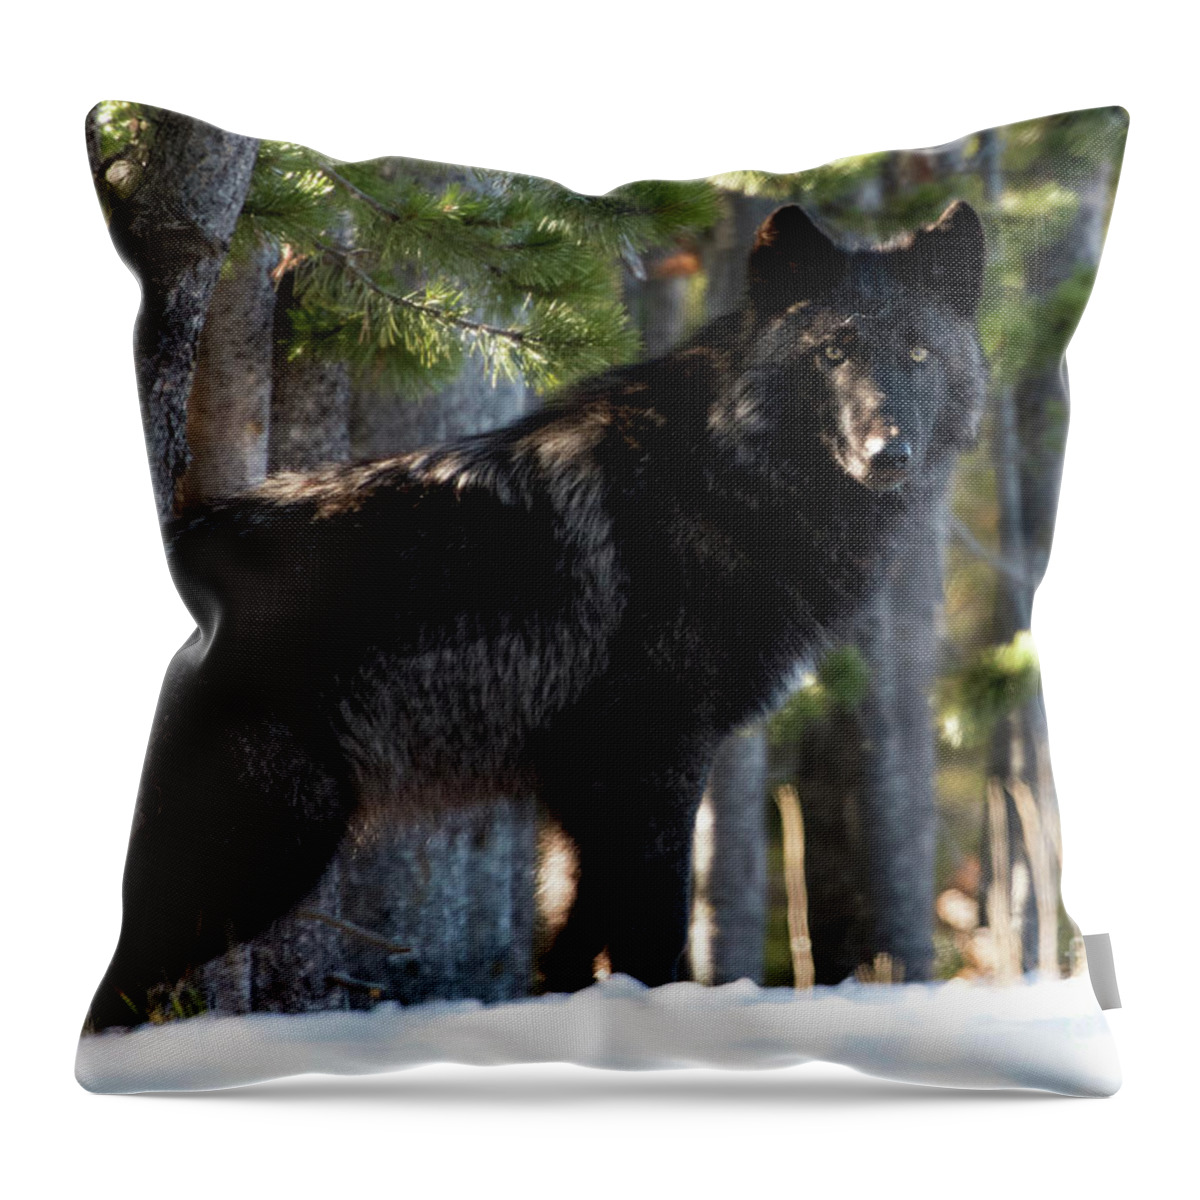 Wolf Throw Pillow featuring the photograph Little Blackie by Deby Dixon